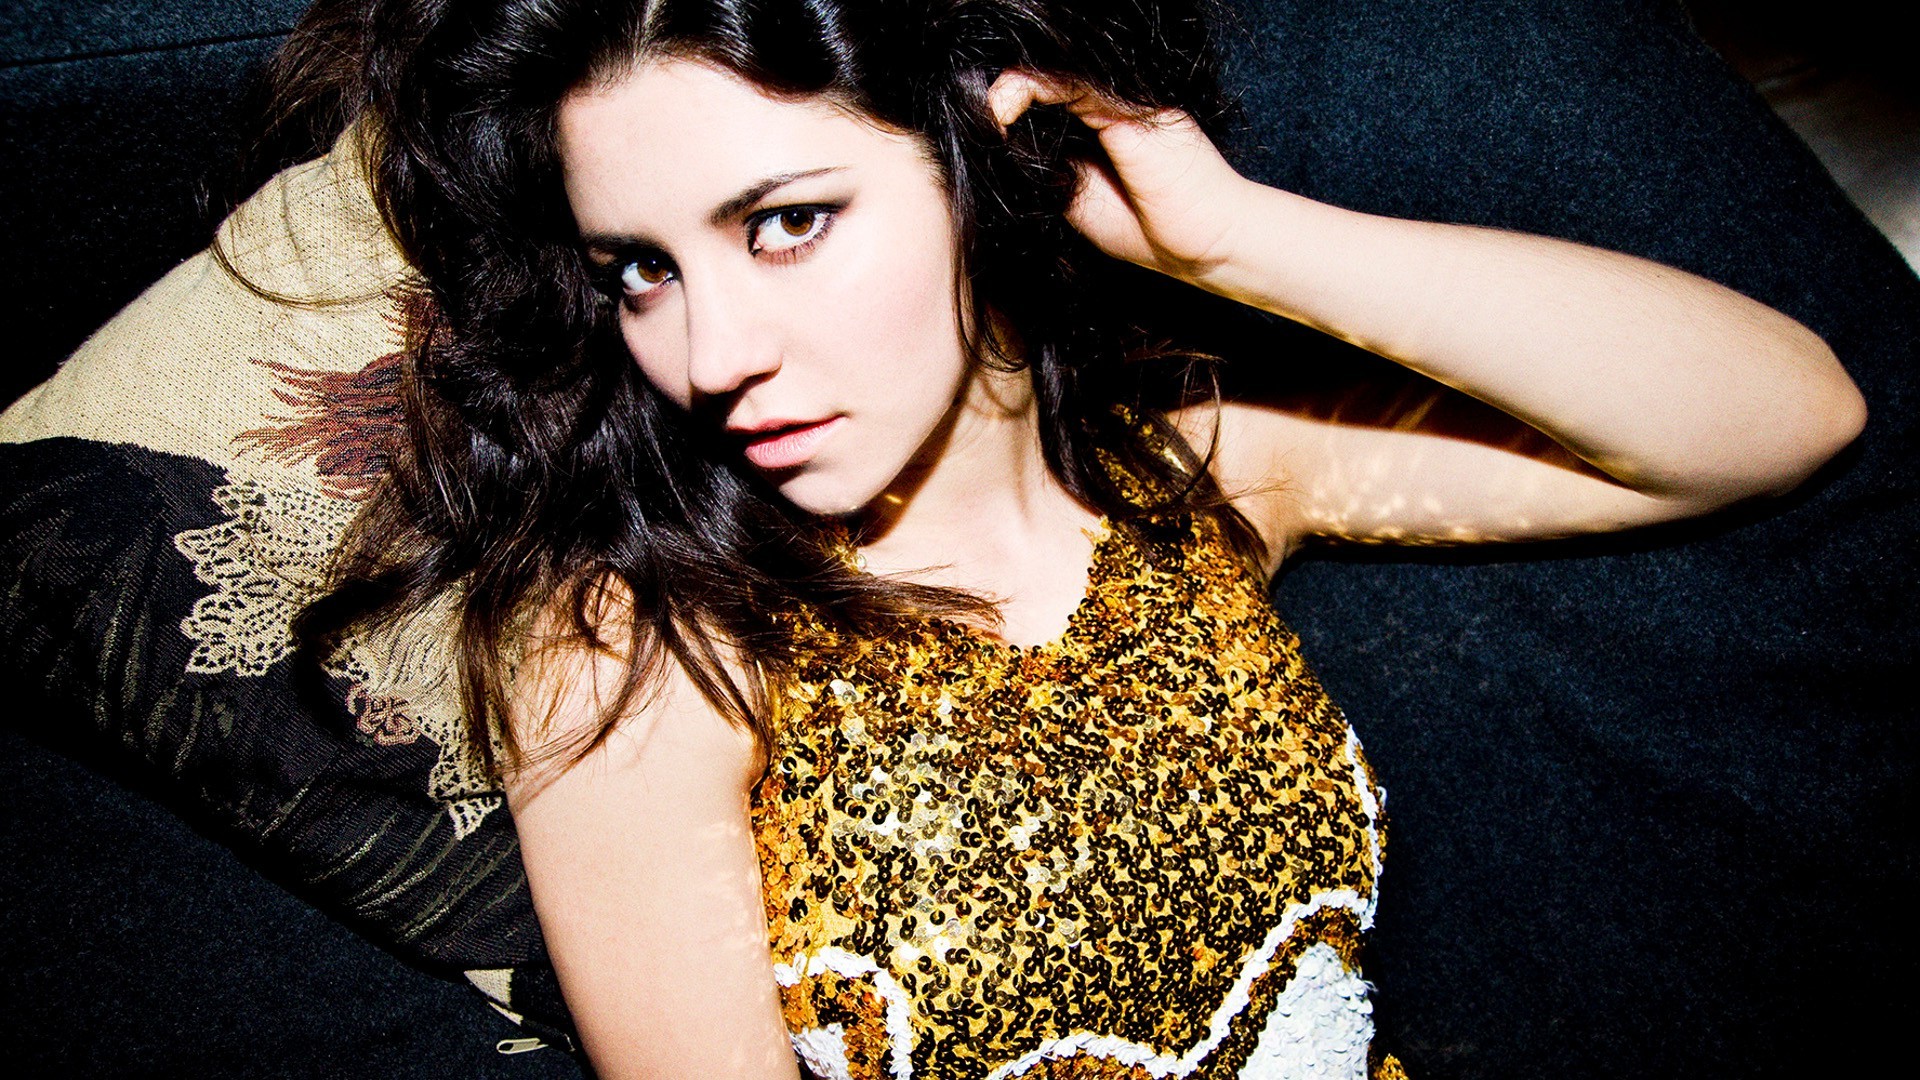 women, Singer, Brunette, Long Hair, Looking At Viewer, Open Mouth, Musicians, Bare Shoulders, Lying On Back, Armpits, Hands In Hair, Marina And The Diamonds, Music, Yellow Dress, Pillow, Brown Eyes Wallpaper